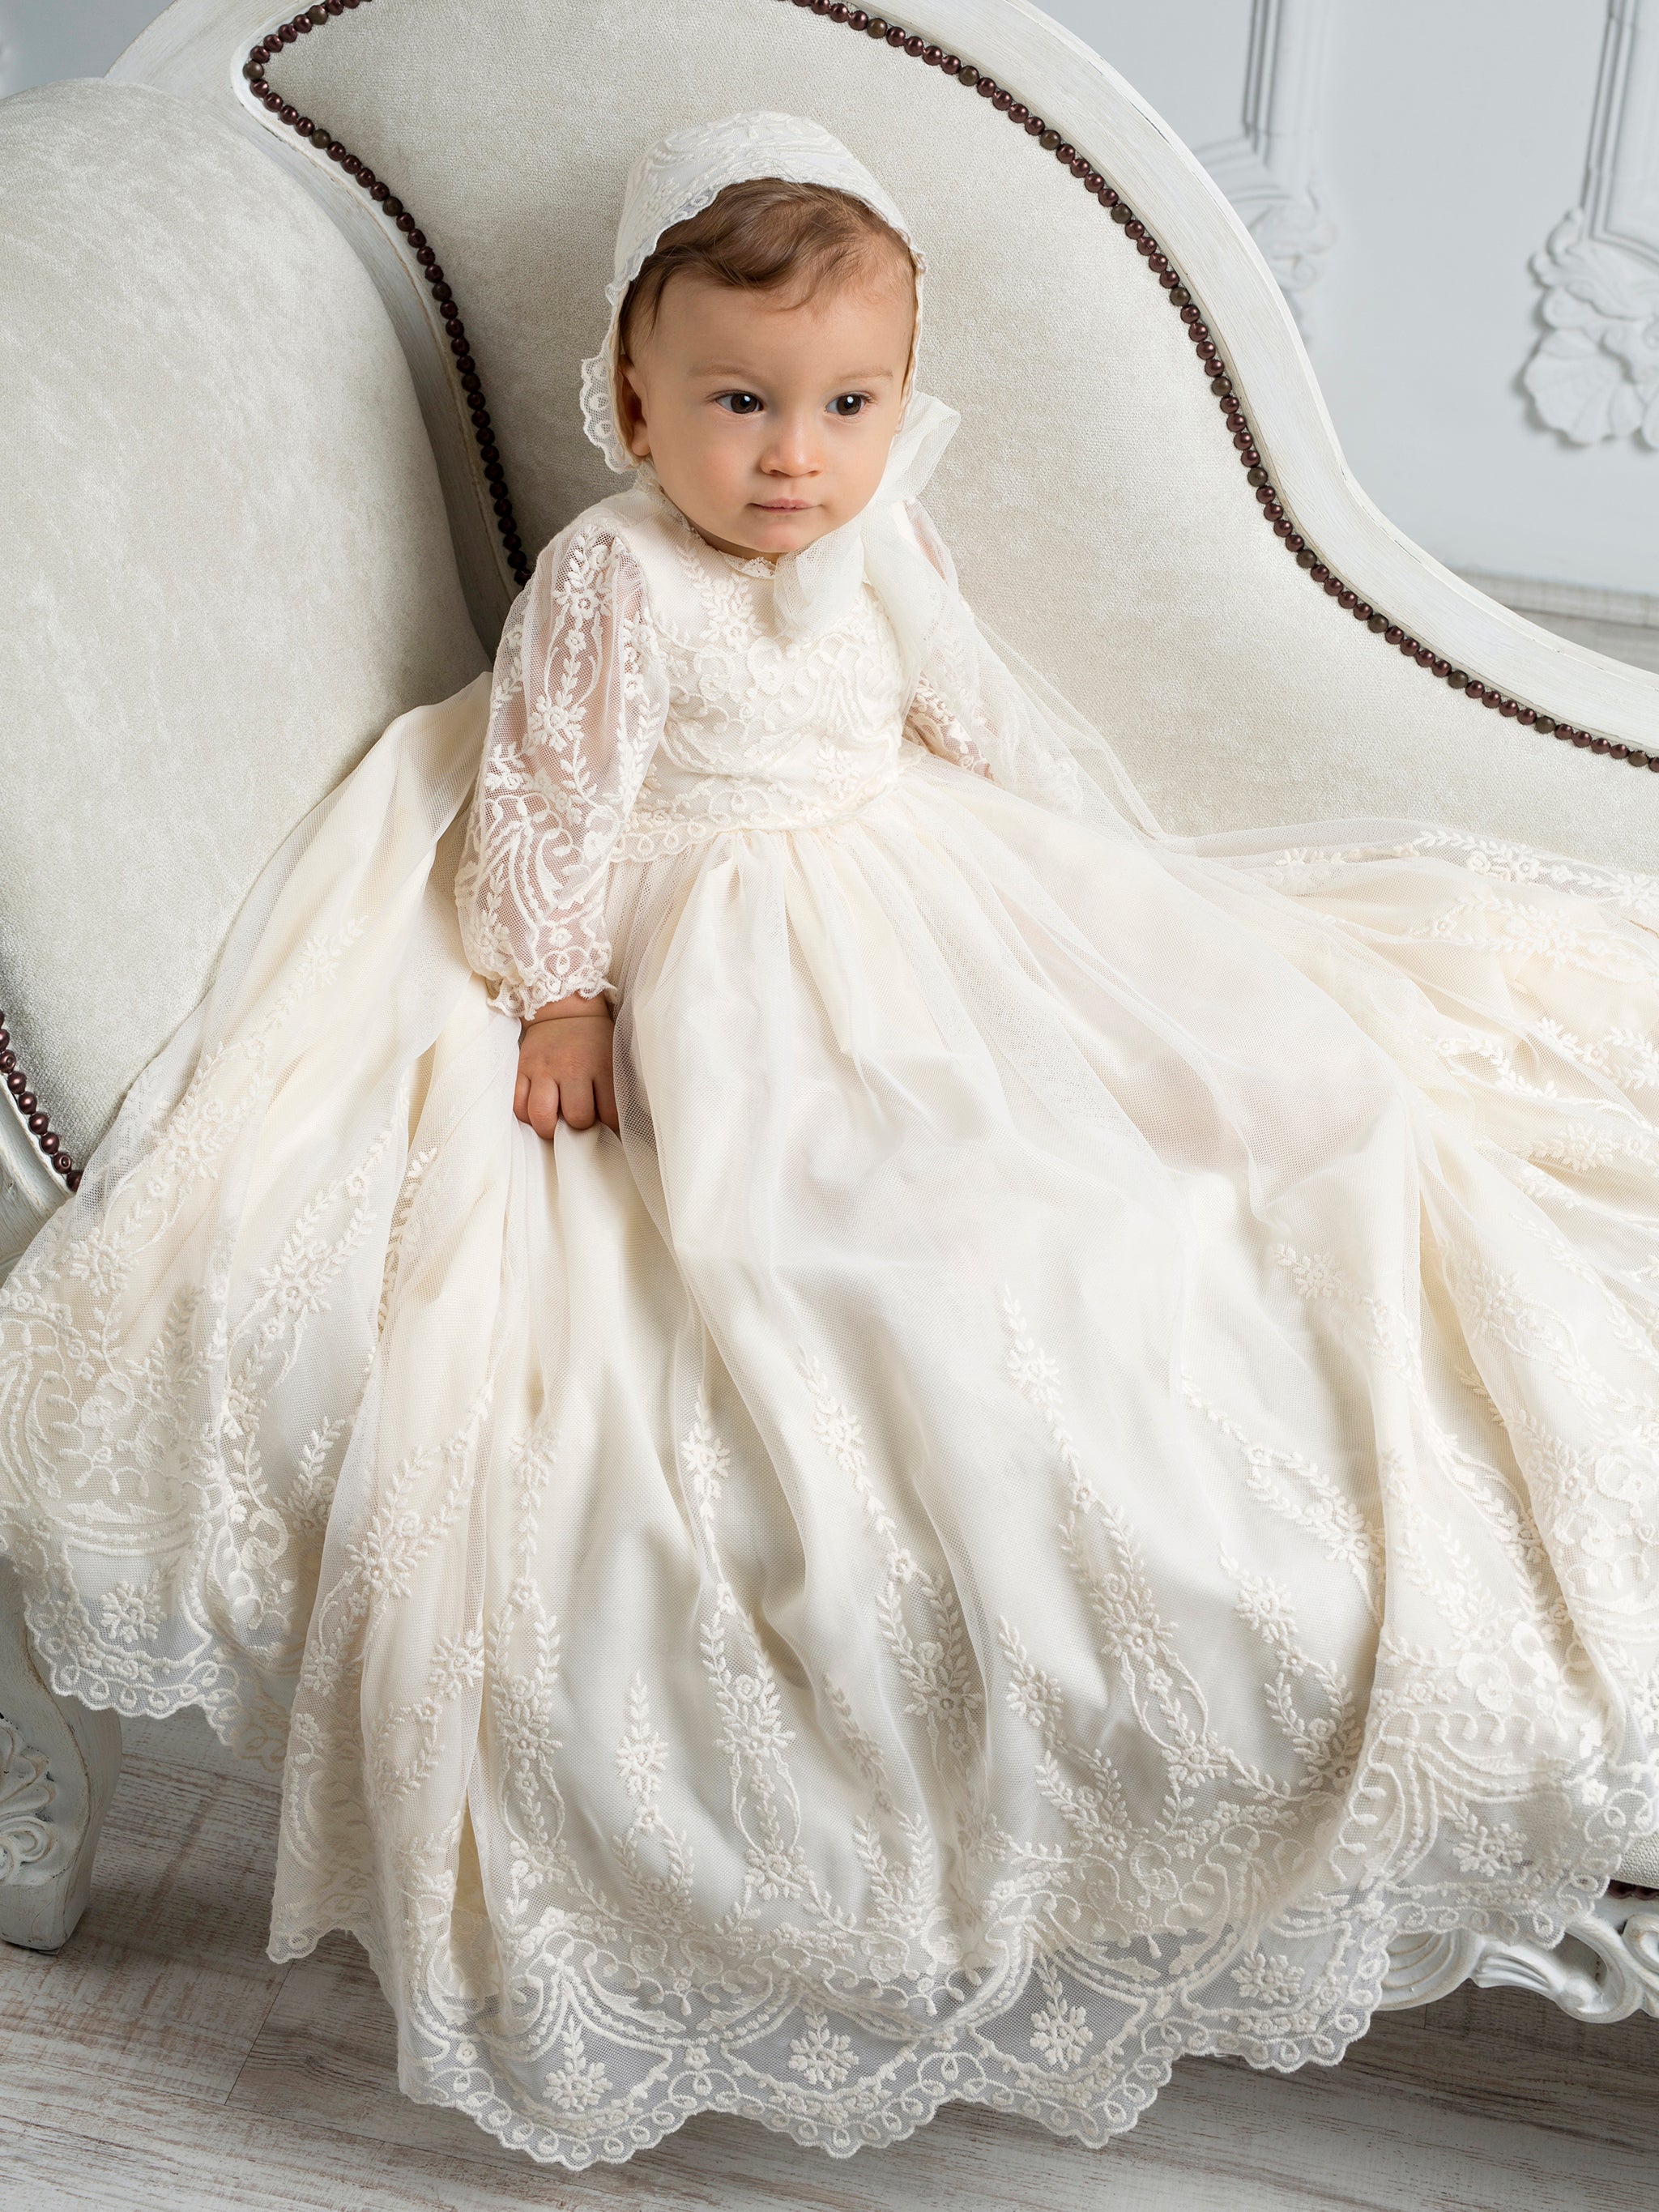 Top more than 92 infant christening gown latest